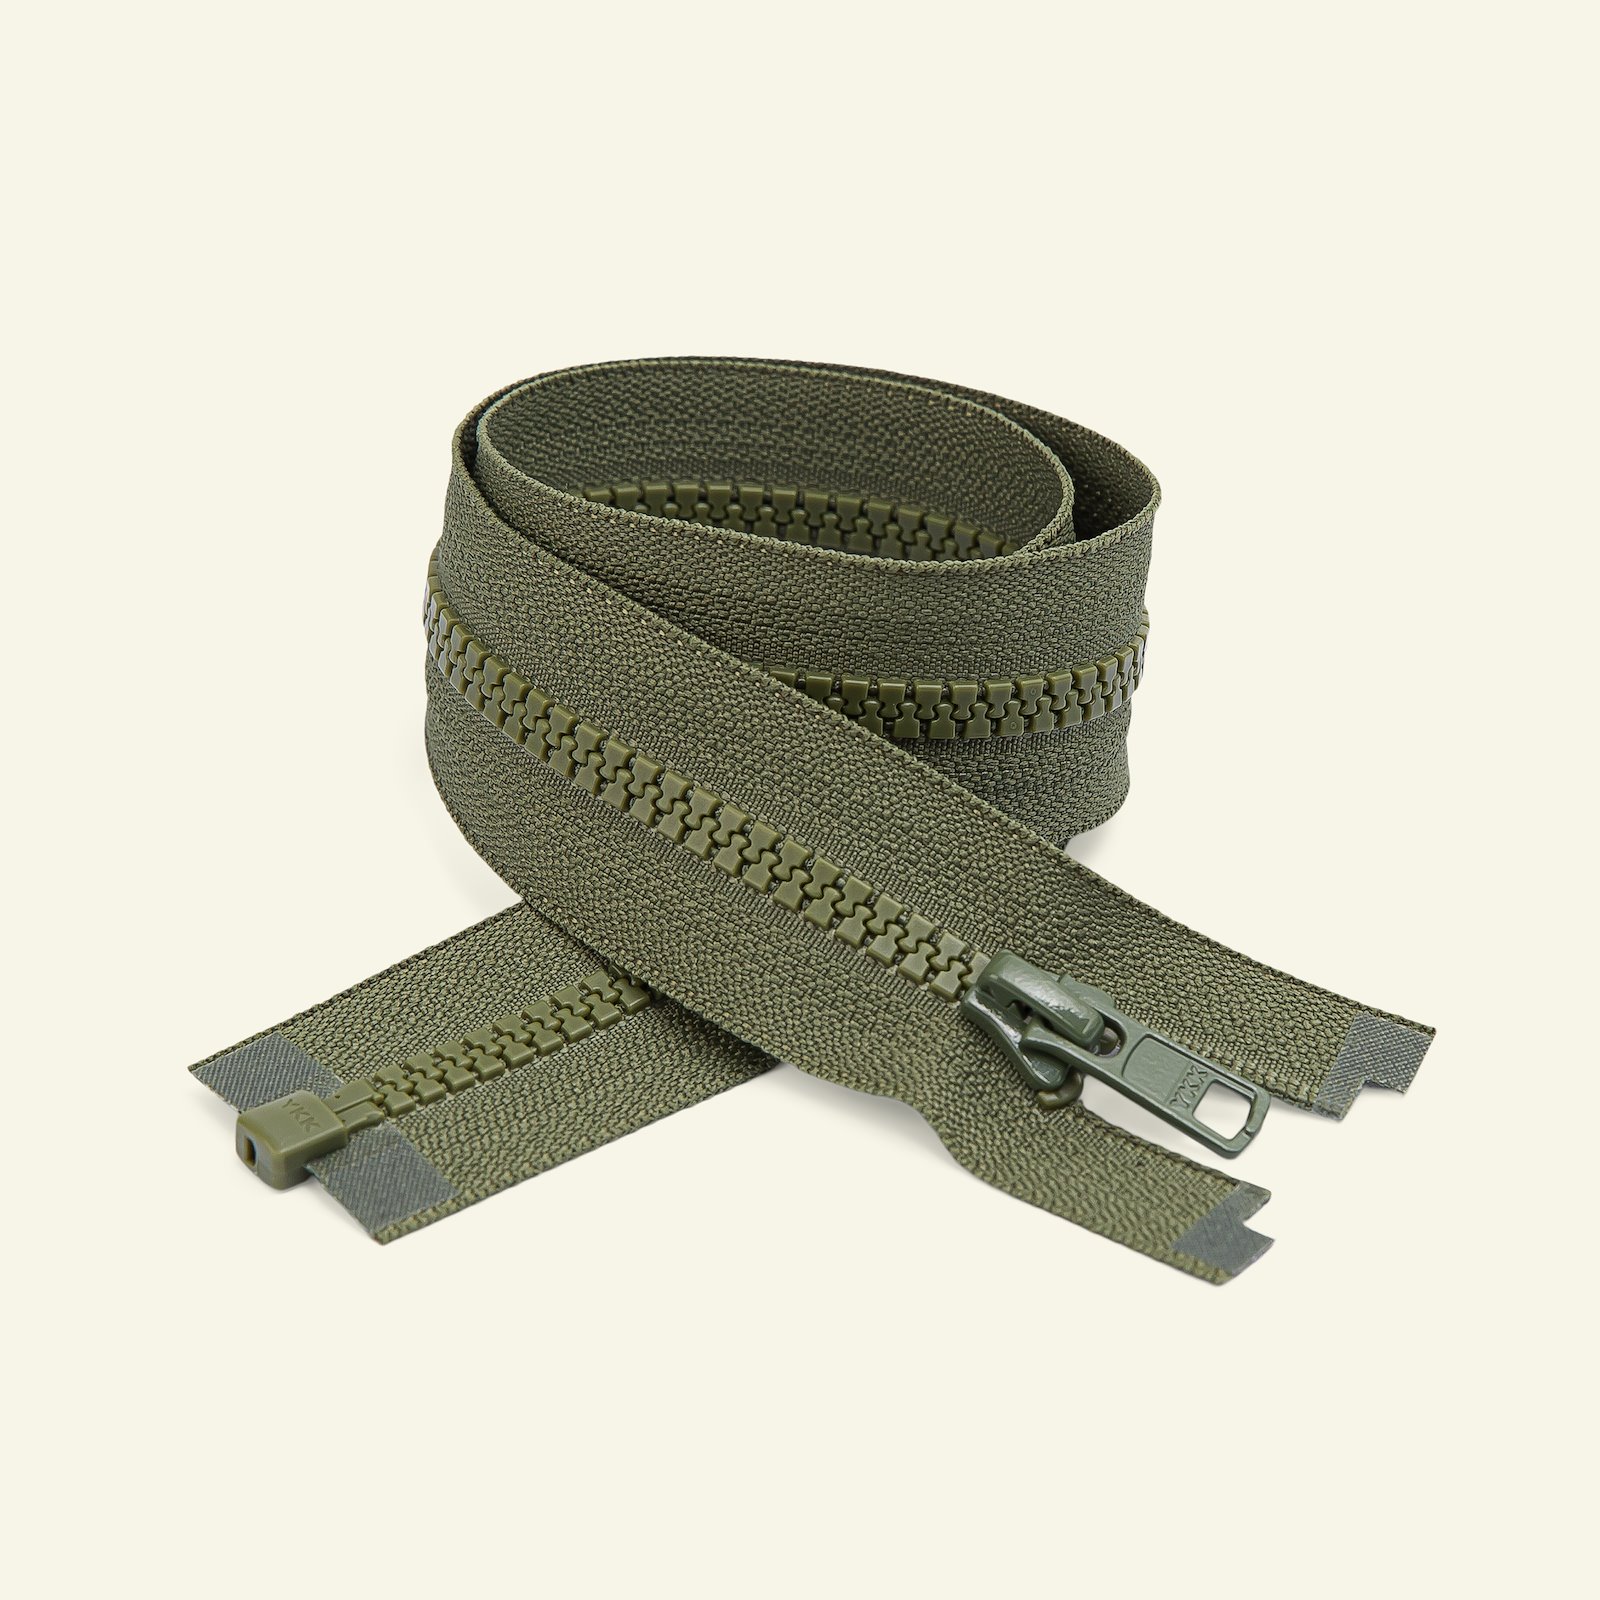 YKK zip 6mm open end 75cm army x50033_pack